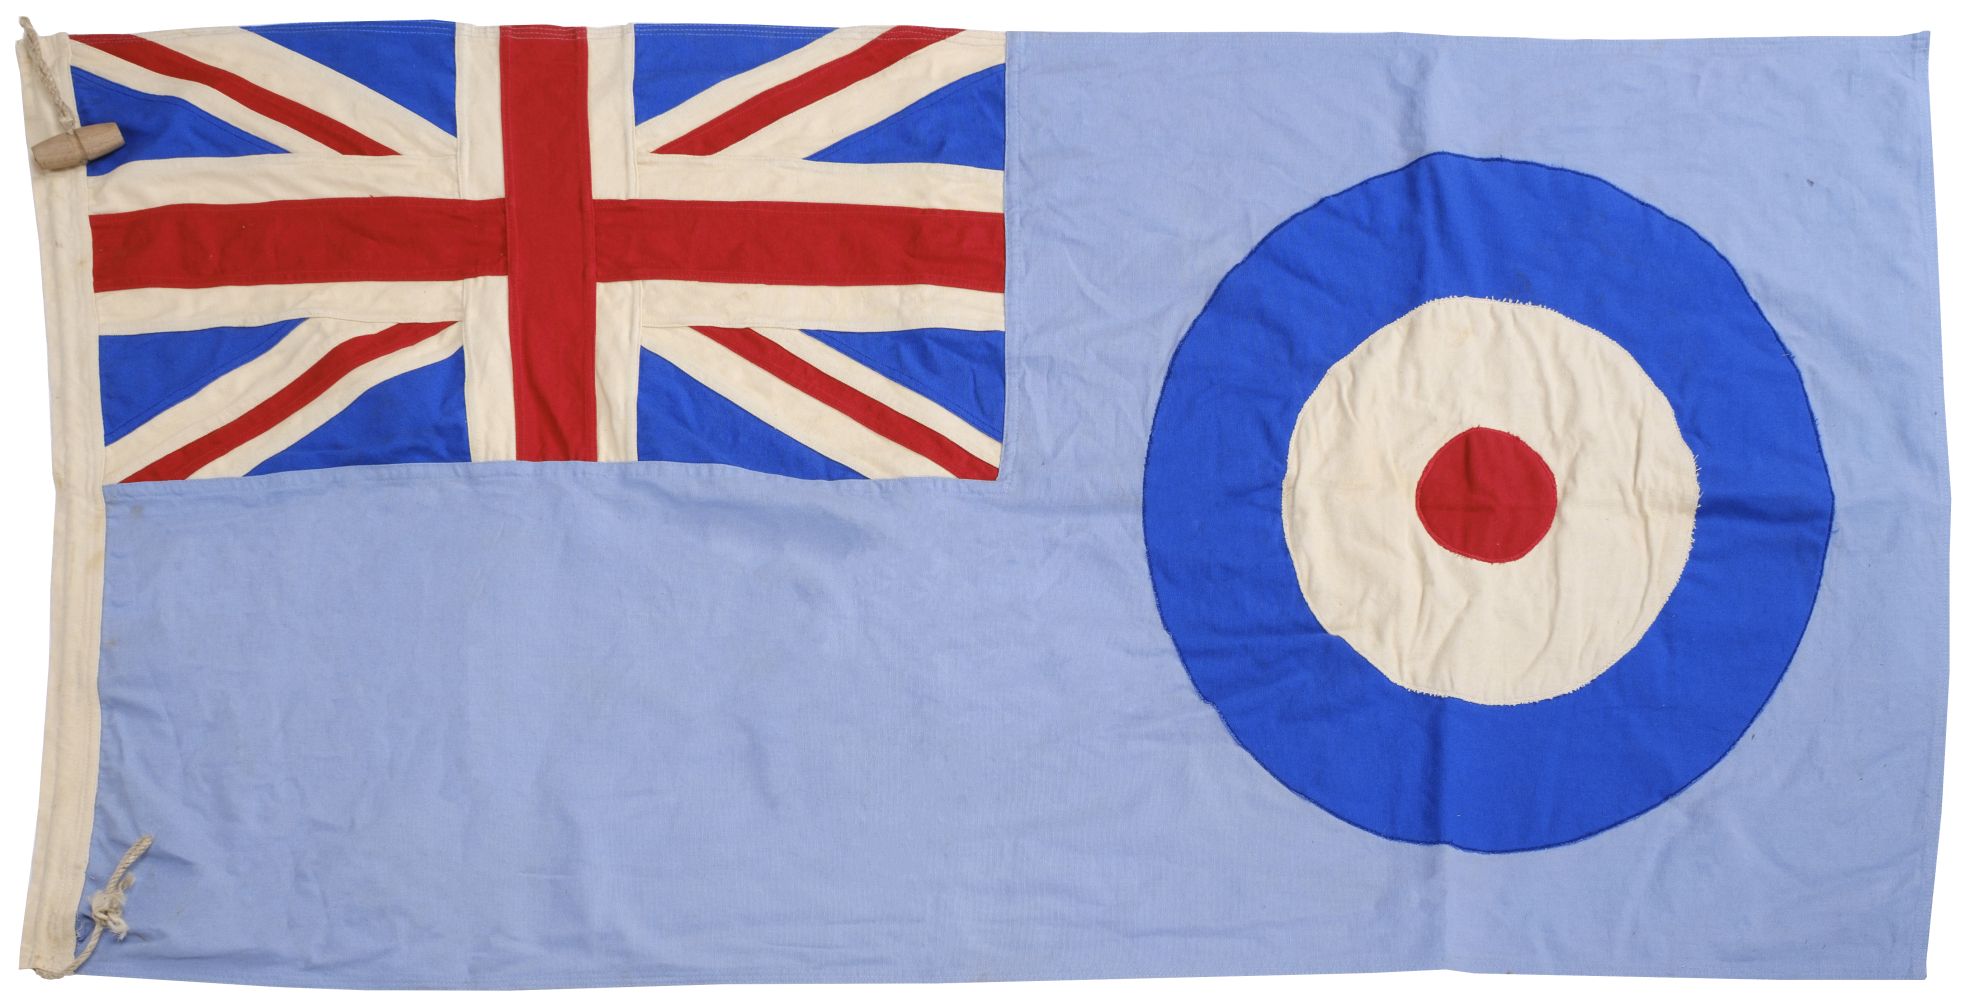 Ensign. WWII Royal Air Force Station ensign-flag, dated 1941